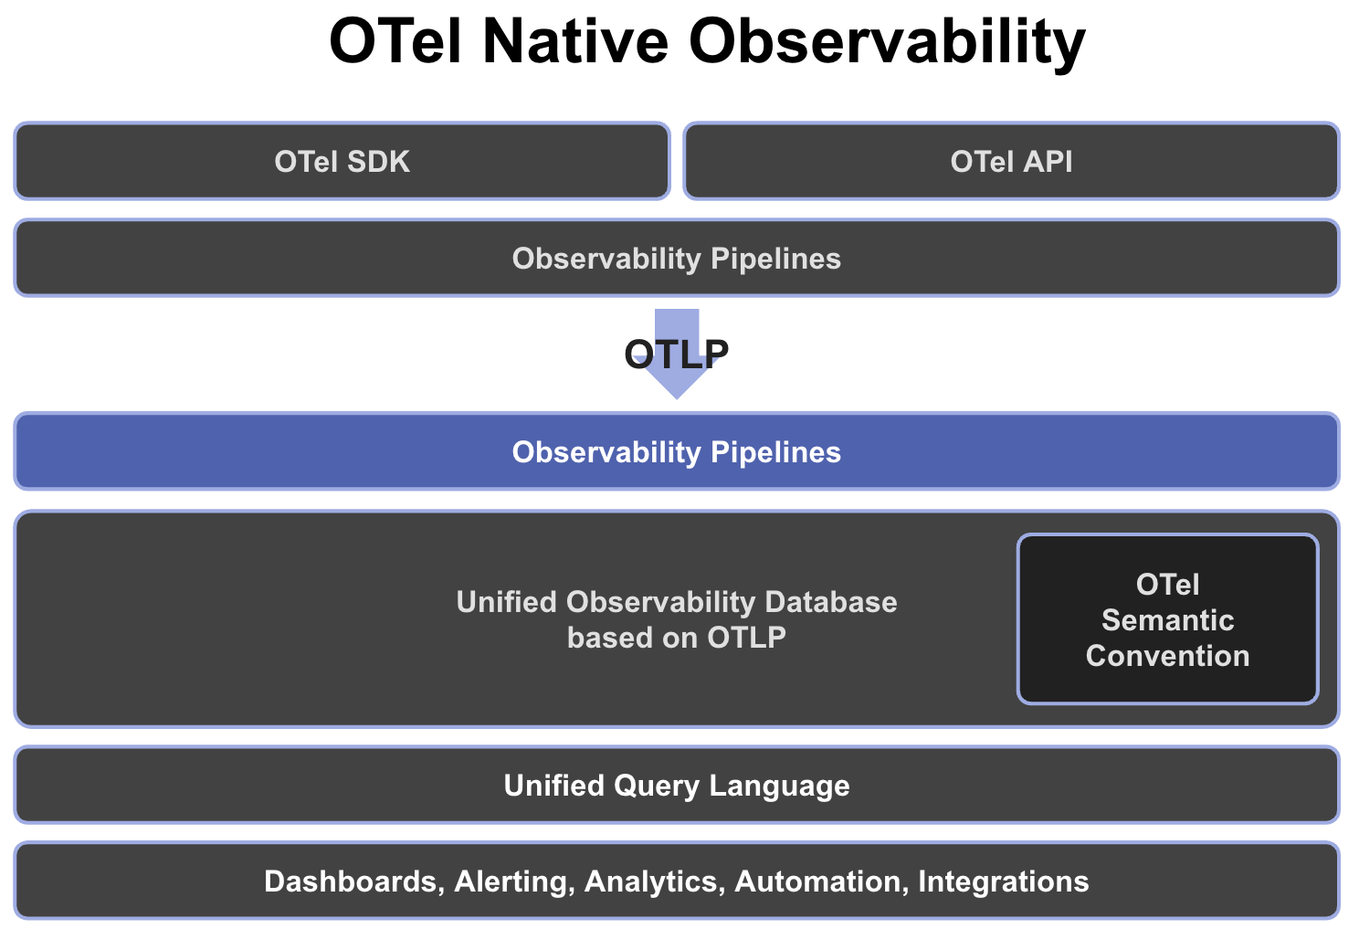 Overview of the logical components involved in OpenTelemetry-native observability.